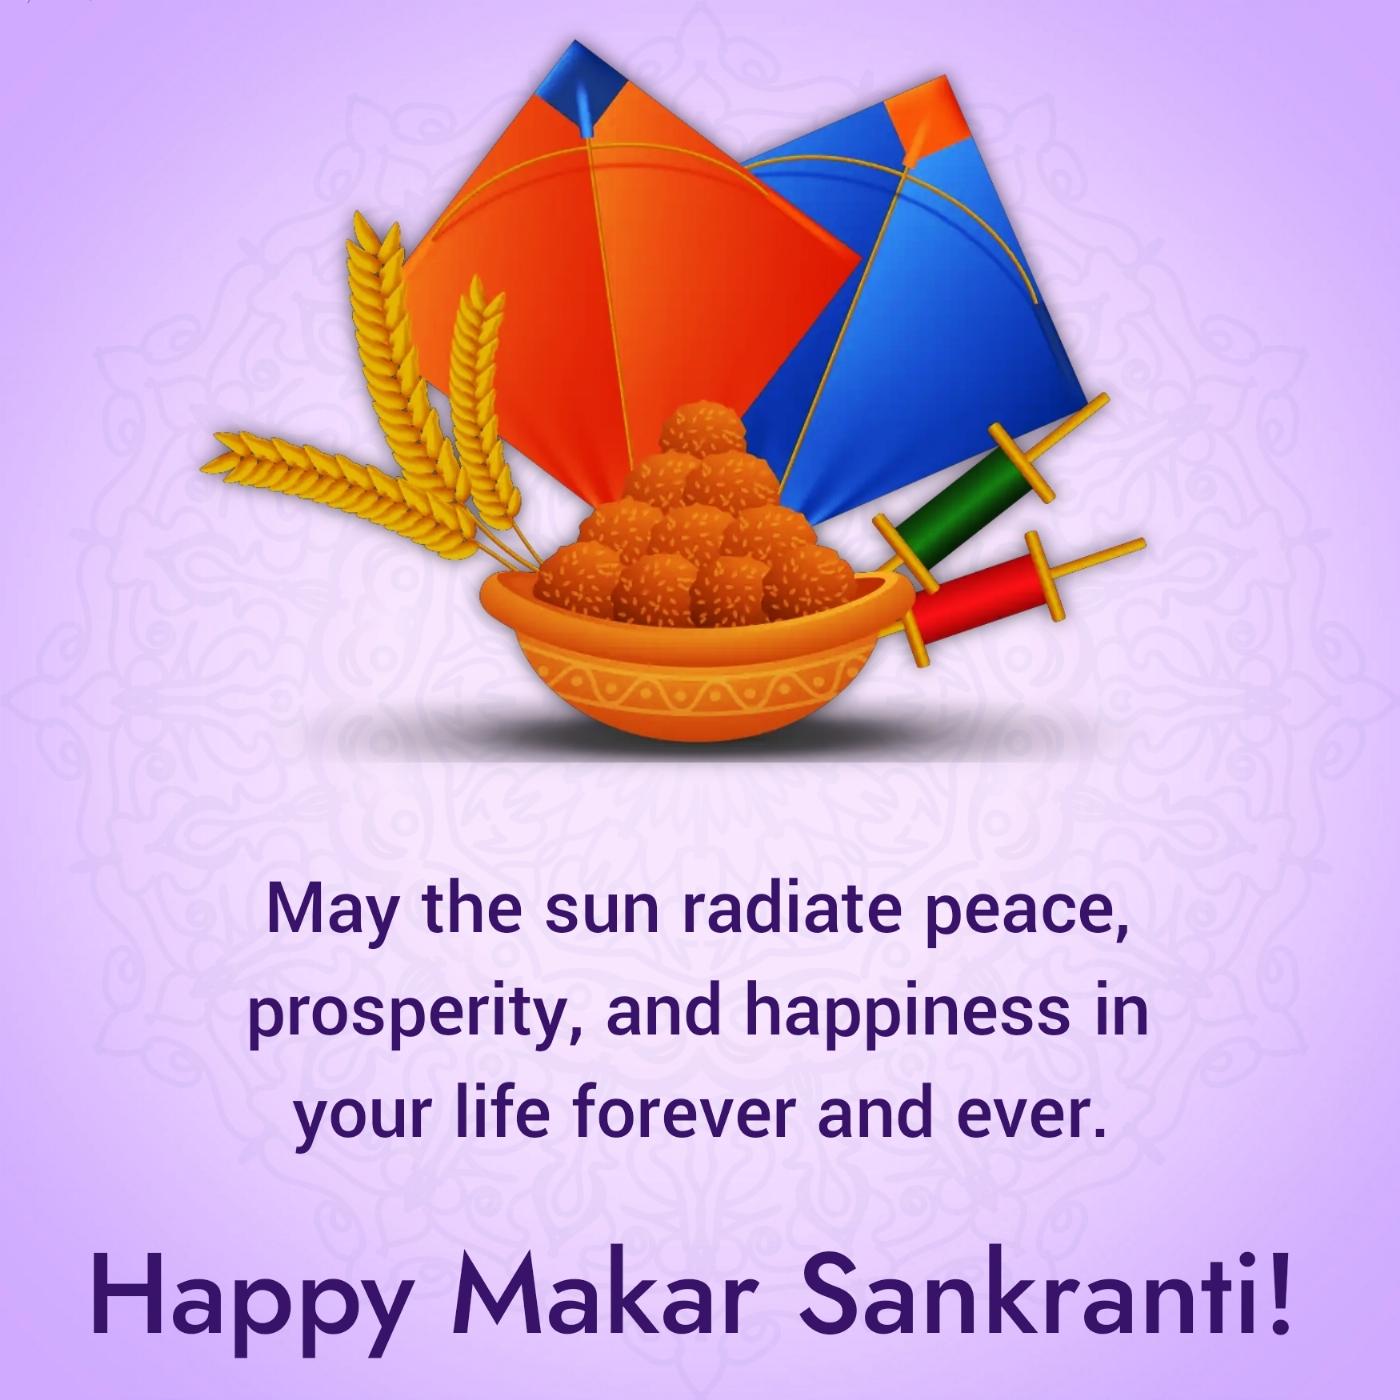 May the sun radiate peace prosperity and happiness